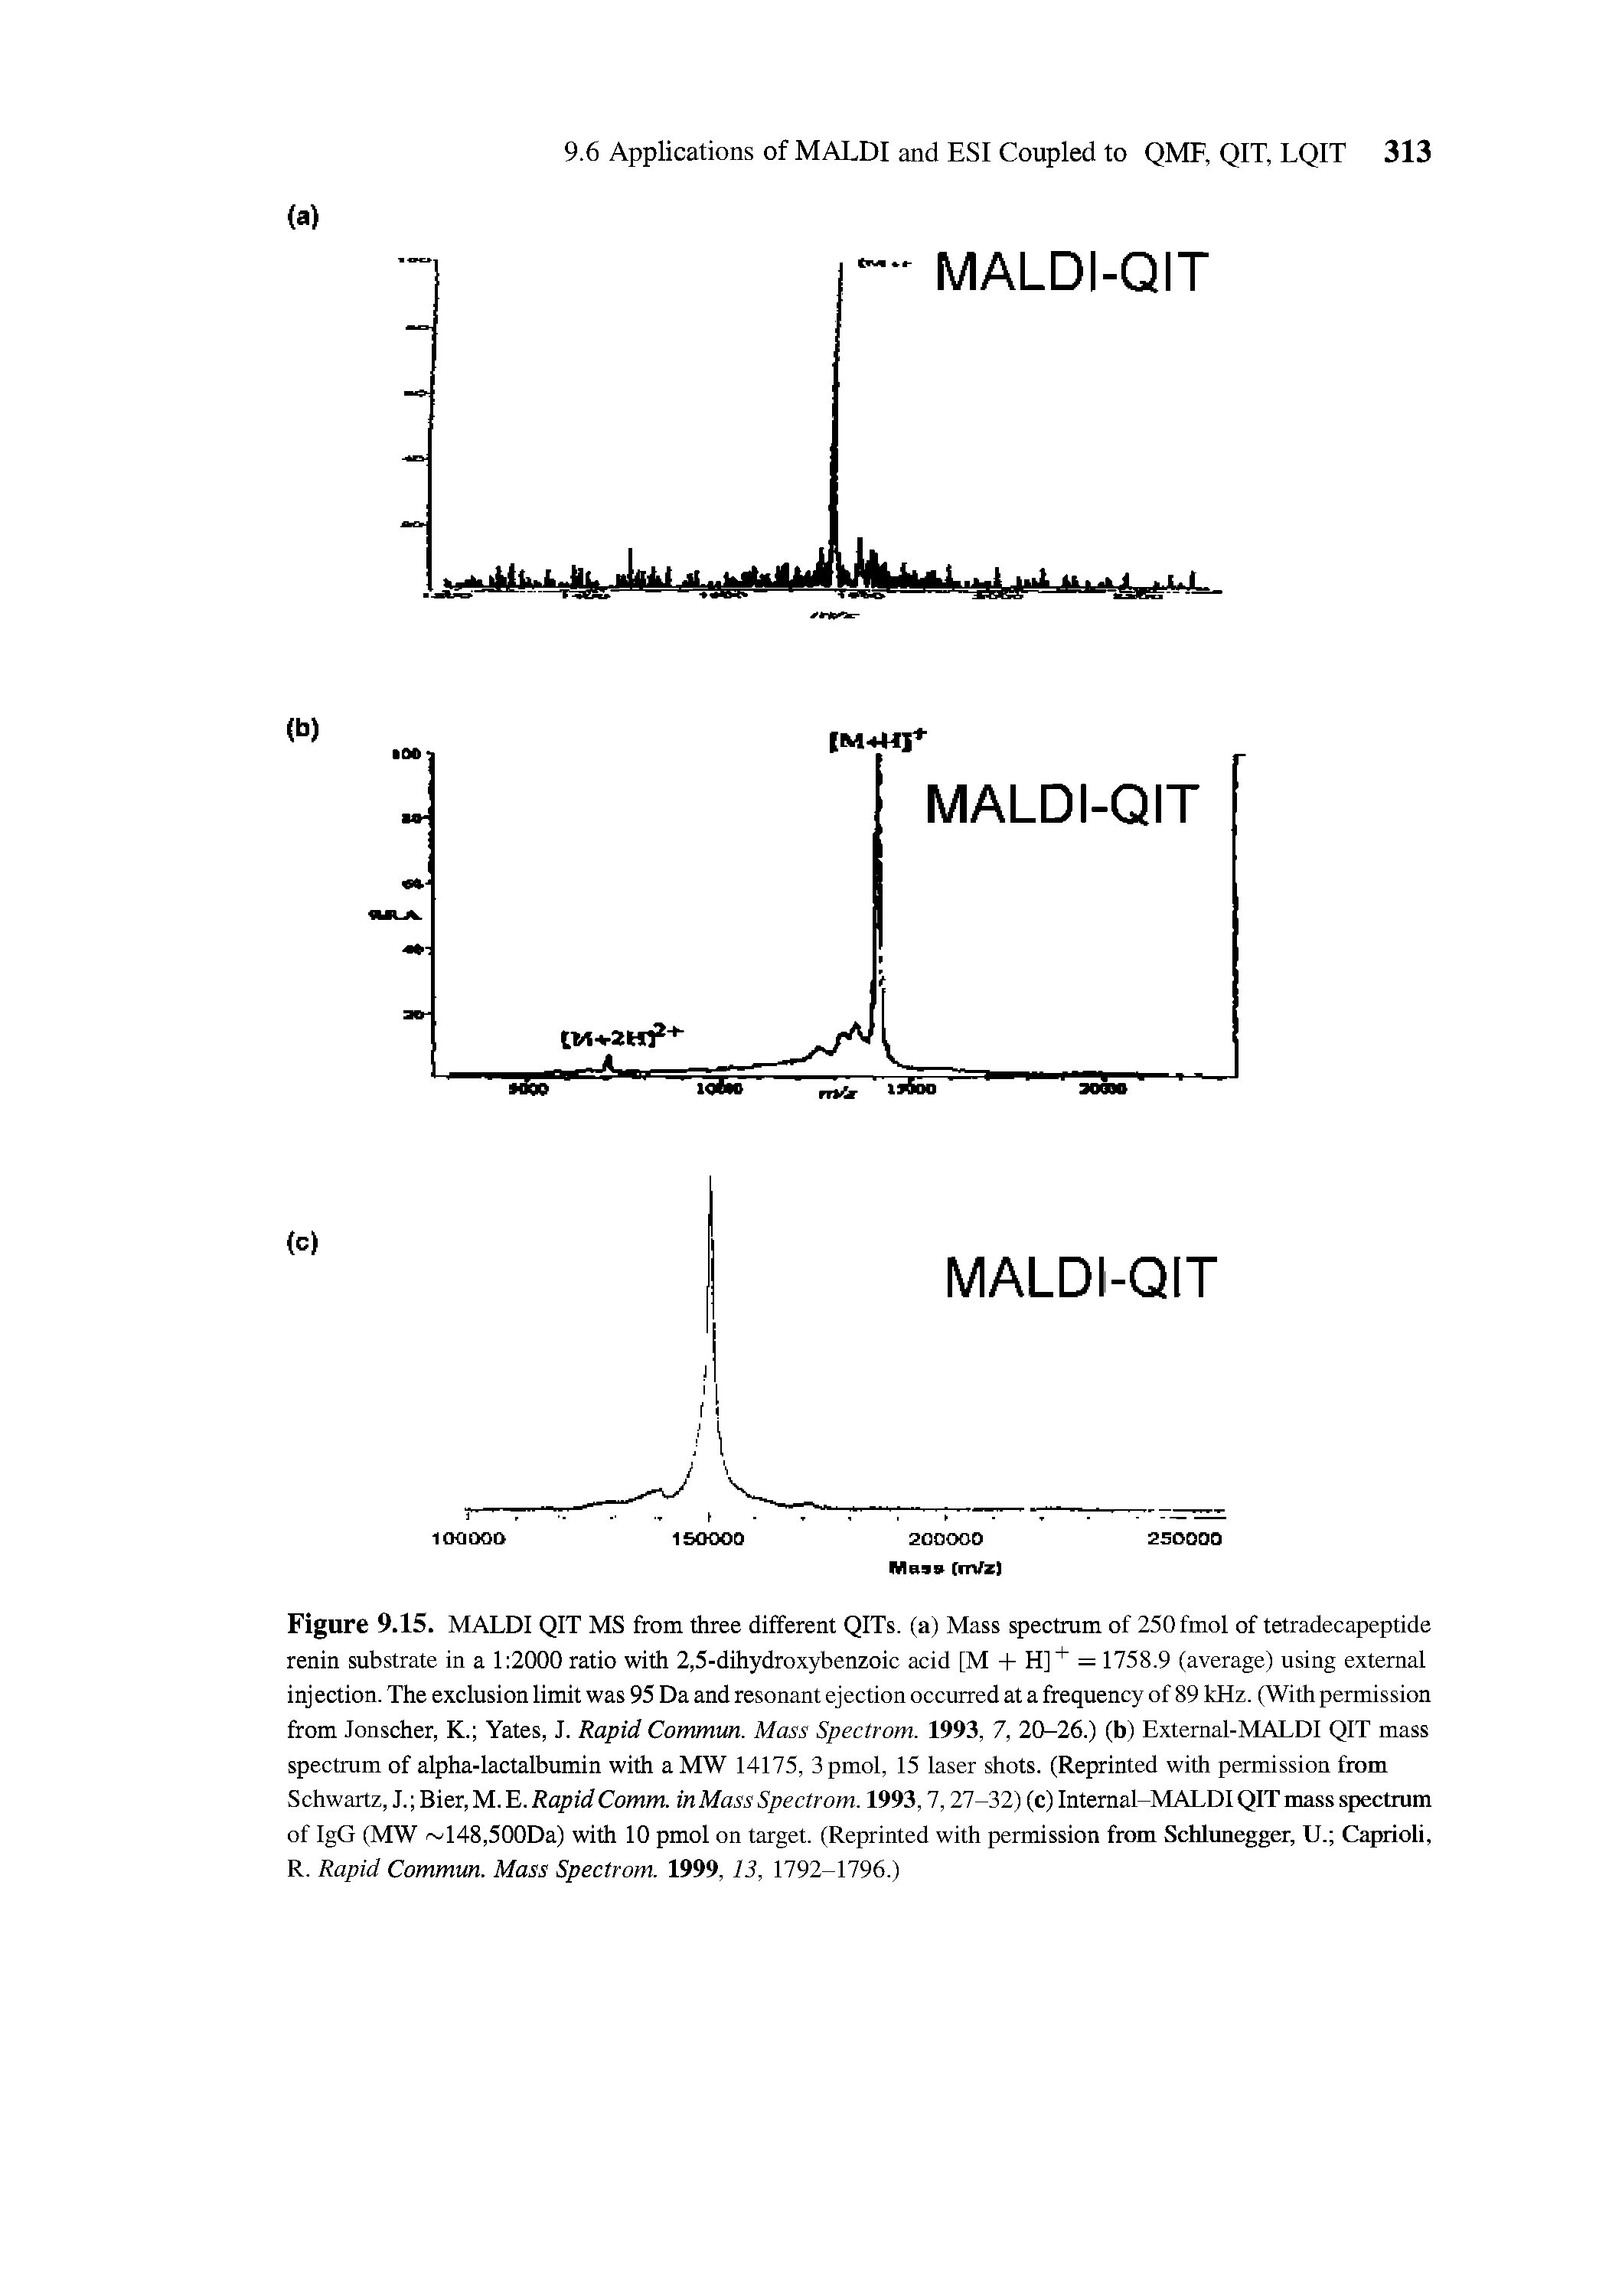 Figure 9.15. MALDI QIT MS ftom three different QITs. (a) Mass spectrum of 250fmol of tetradecapeptide renin substrate in a 1 2000 ratio with 2,5-dihydroxybenzoic acid [M + H] = 1758.9 (average) using external inj ection. The exclusion limit was 95 Da and resonant ejection occurred at a frequency of 89 kHz. (With permission from Jonscher, K. Yates, J. Rapid Commim. Mass Spectrom. 1993, 7, 20-26.) (b) Extemal-MALDI QIT mass spectrum of alpha-lactalbumin with a MW 14175, 3 pmol, 15 laser shots. (Reprinted with permission from Schwartz, J. Bier, M. E. Rapid Comm. inMass Spectrom. 1993,7,27-32) (c) Intemal-MALDIQIT mass spectrum of IgG (MW 148,500Da) with 10 pmol on target. (Reprinted with permission from Schlimegger, U. Caprioli, R. Rapid Commm. Mass Spectrom. 1999, 13, 1792-1796.)...